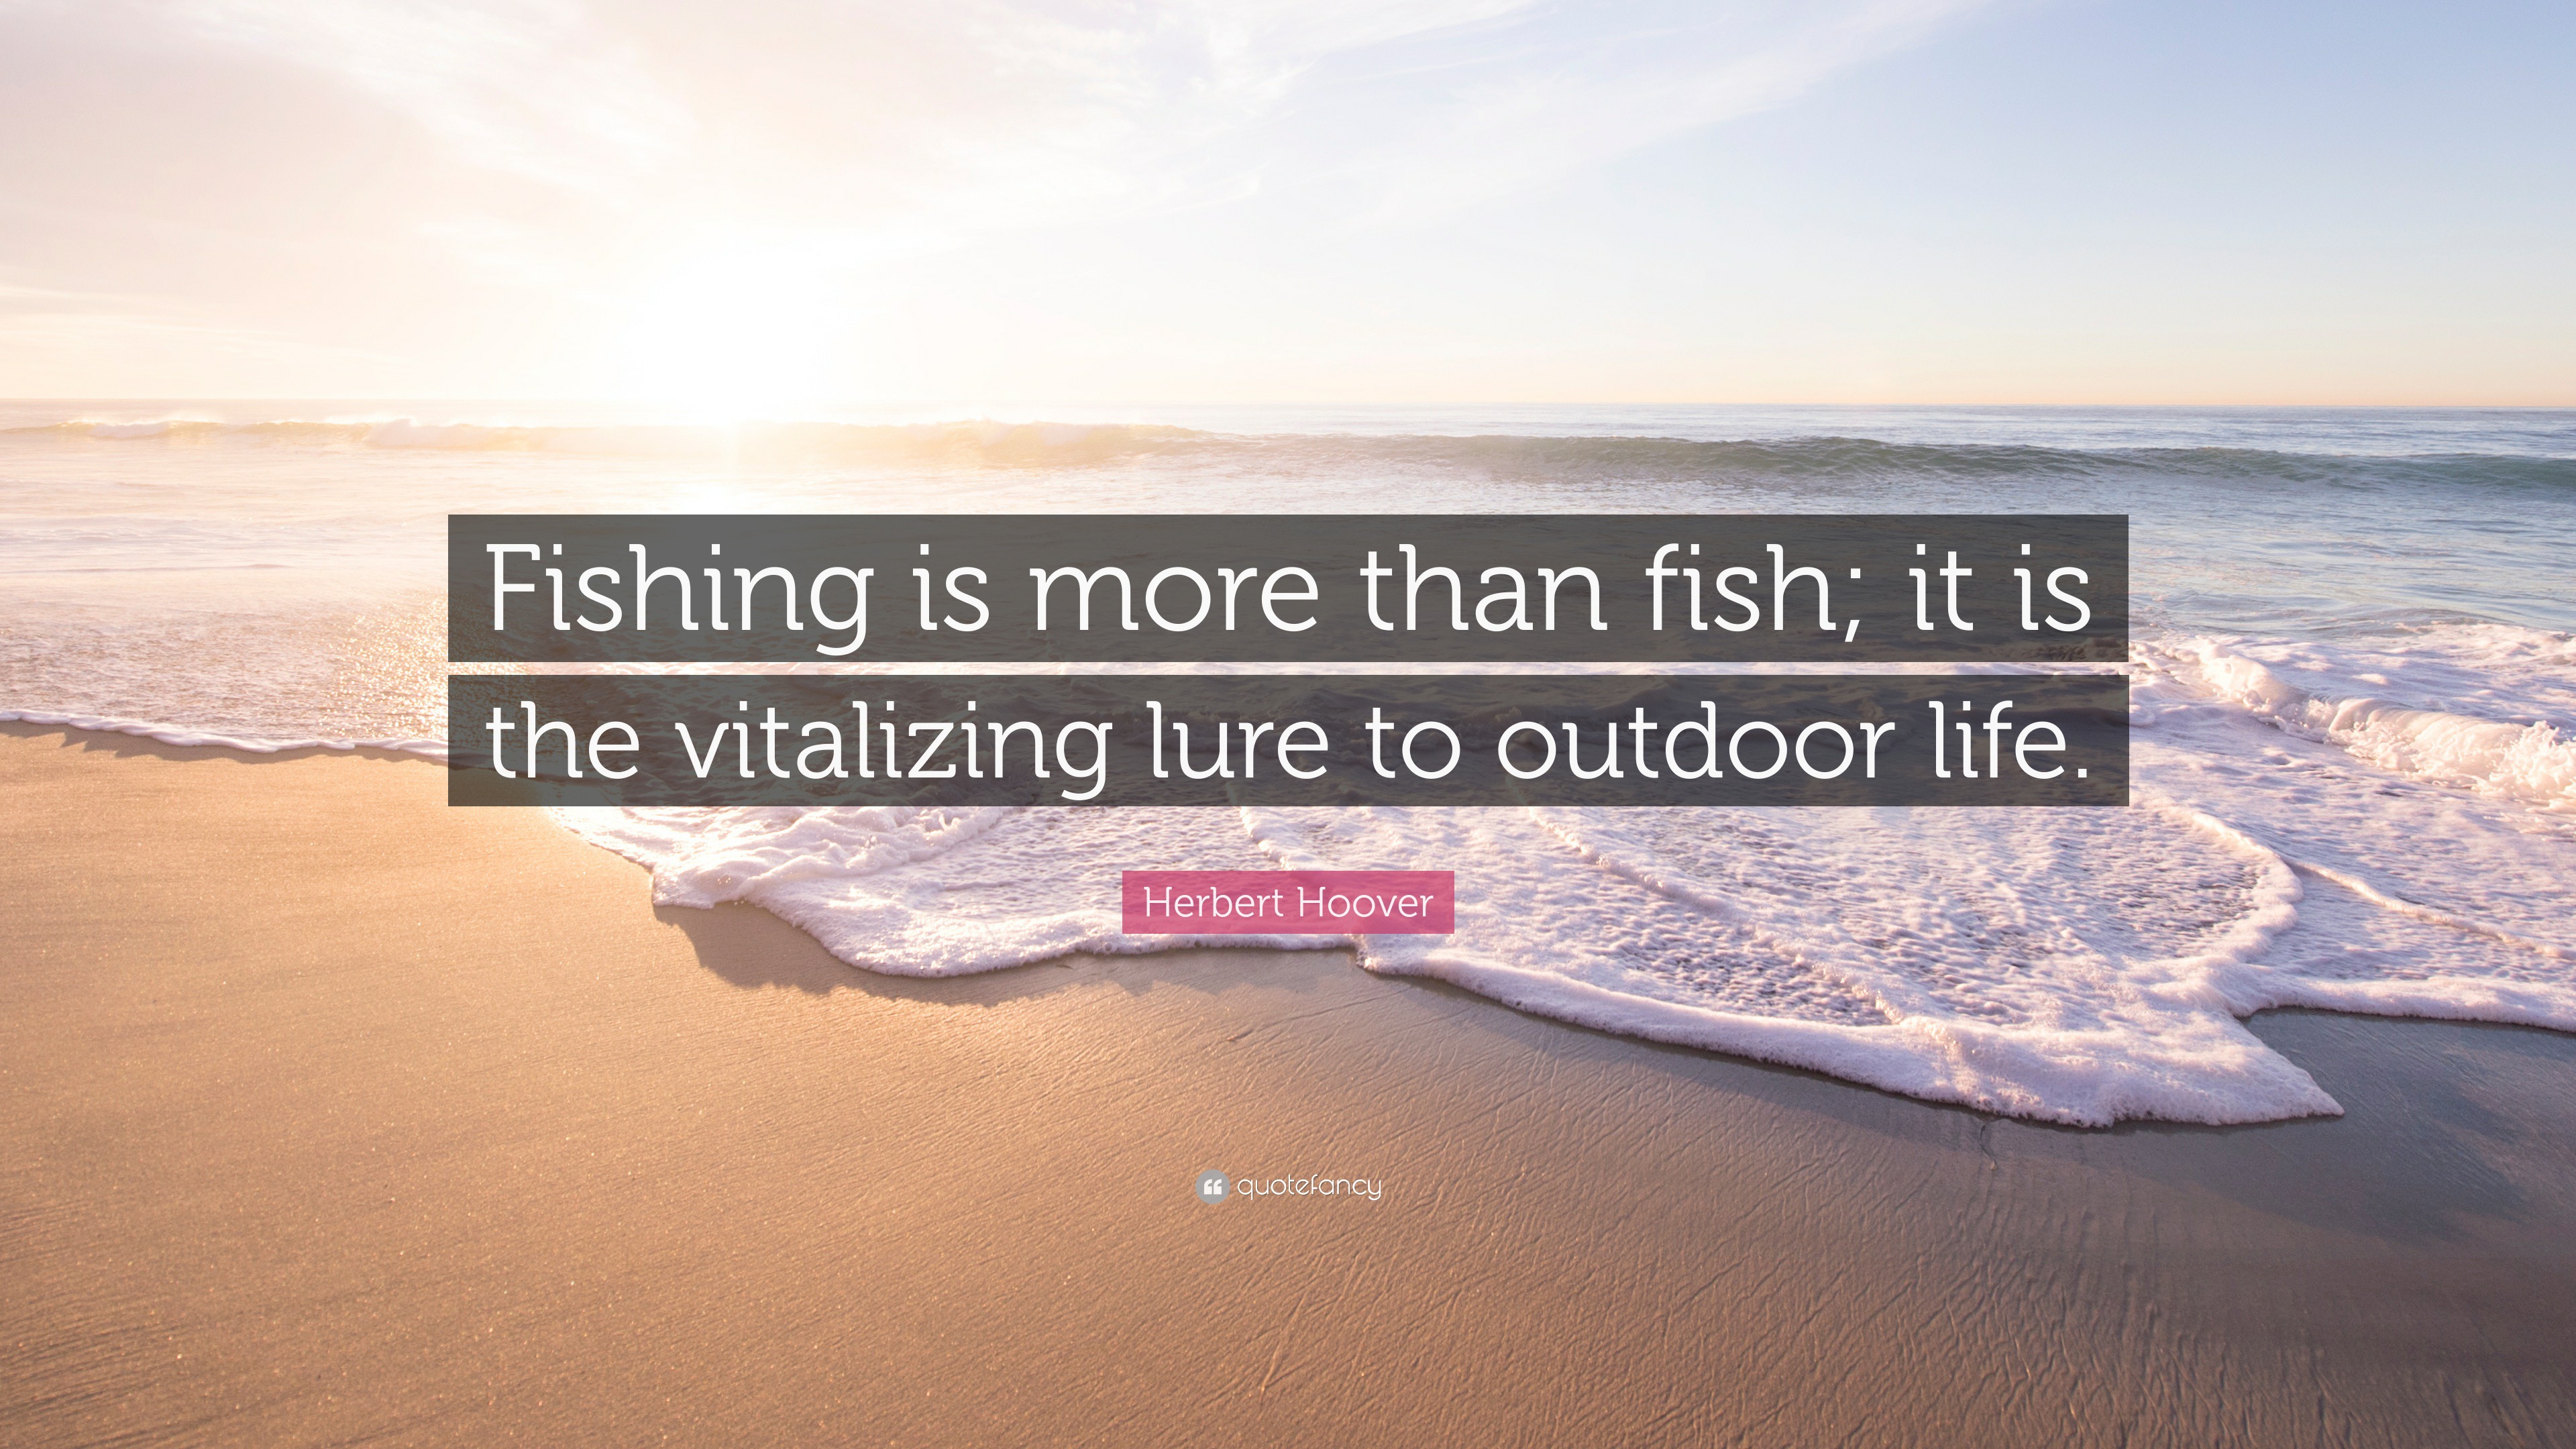 Herbert Hoover Quote: “Fishing is more than fish; it is the vitalizing lure  to outdoor life.”